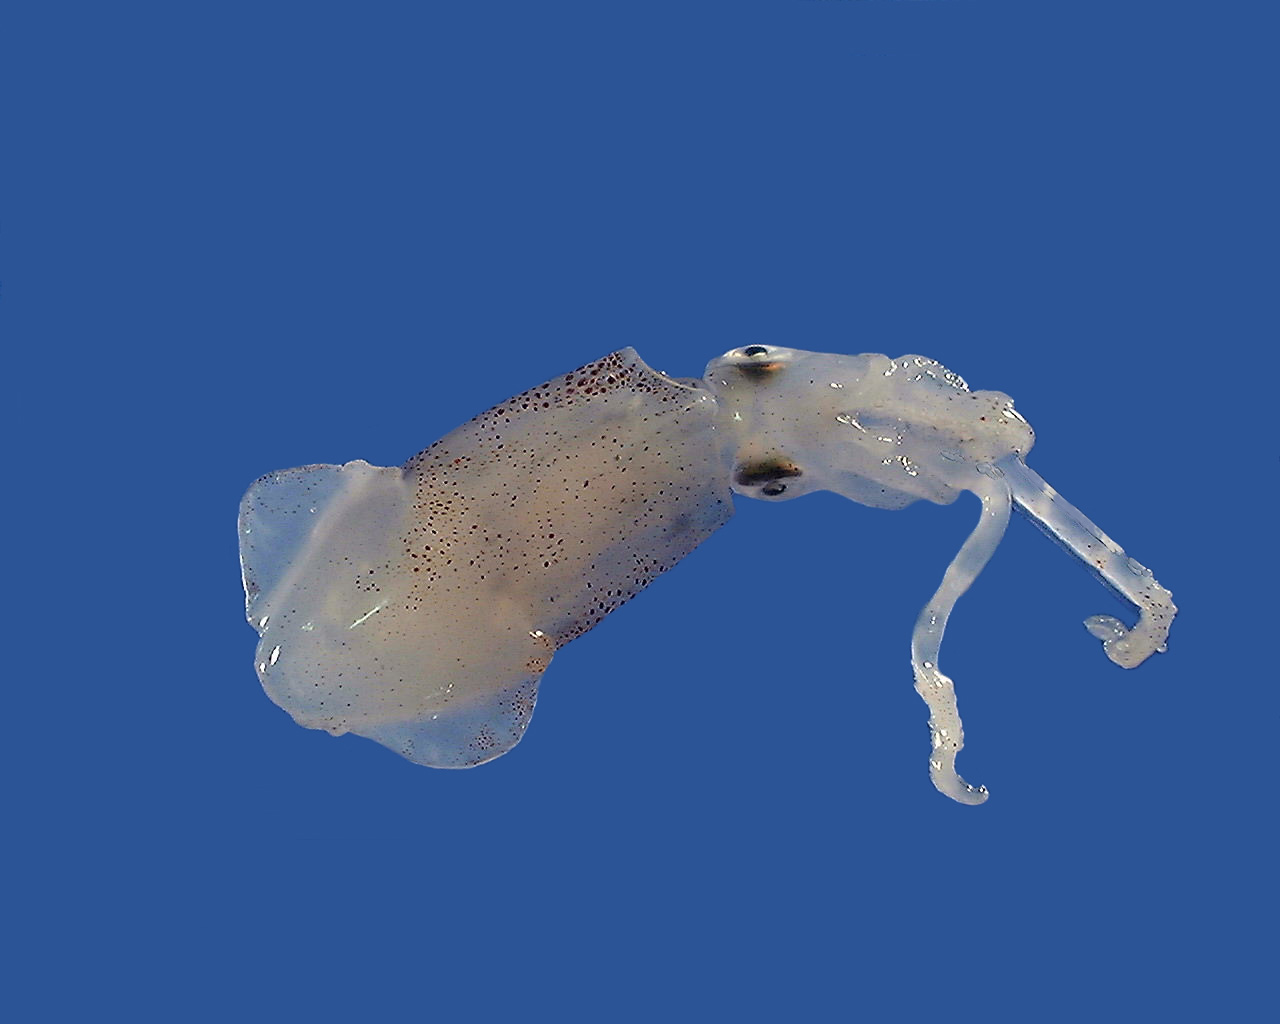 A brief squid lays against a solid background.